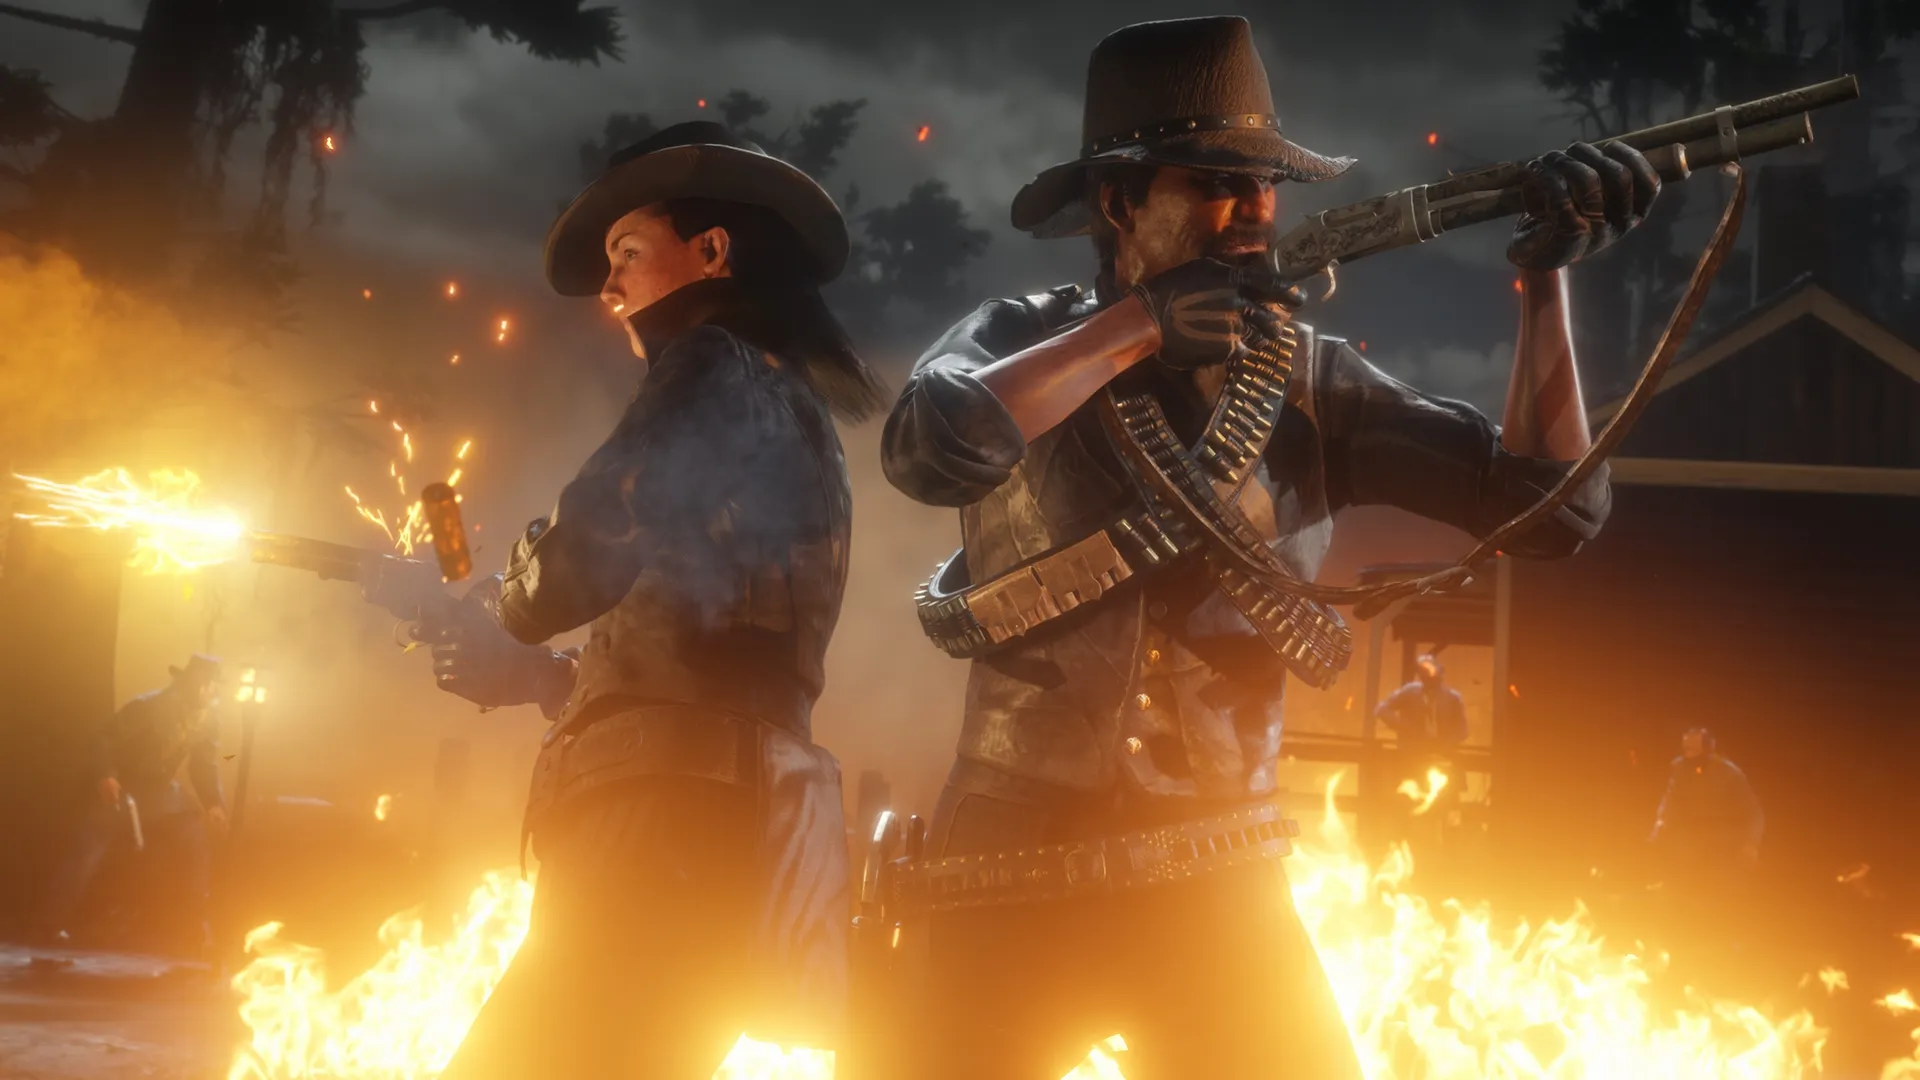 red dead online moonshiners 12 3 2019 image 3f1575449355